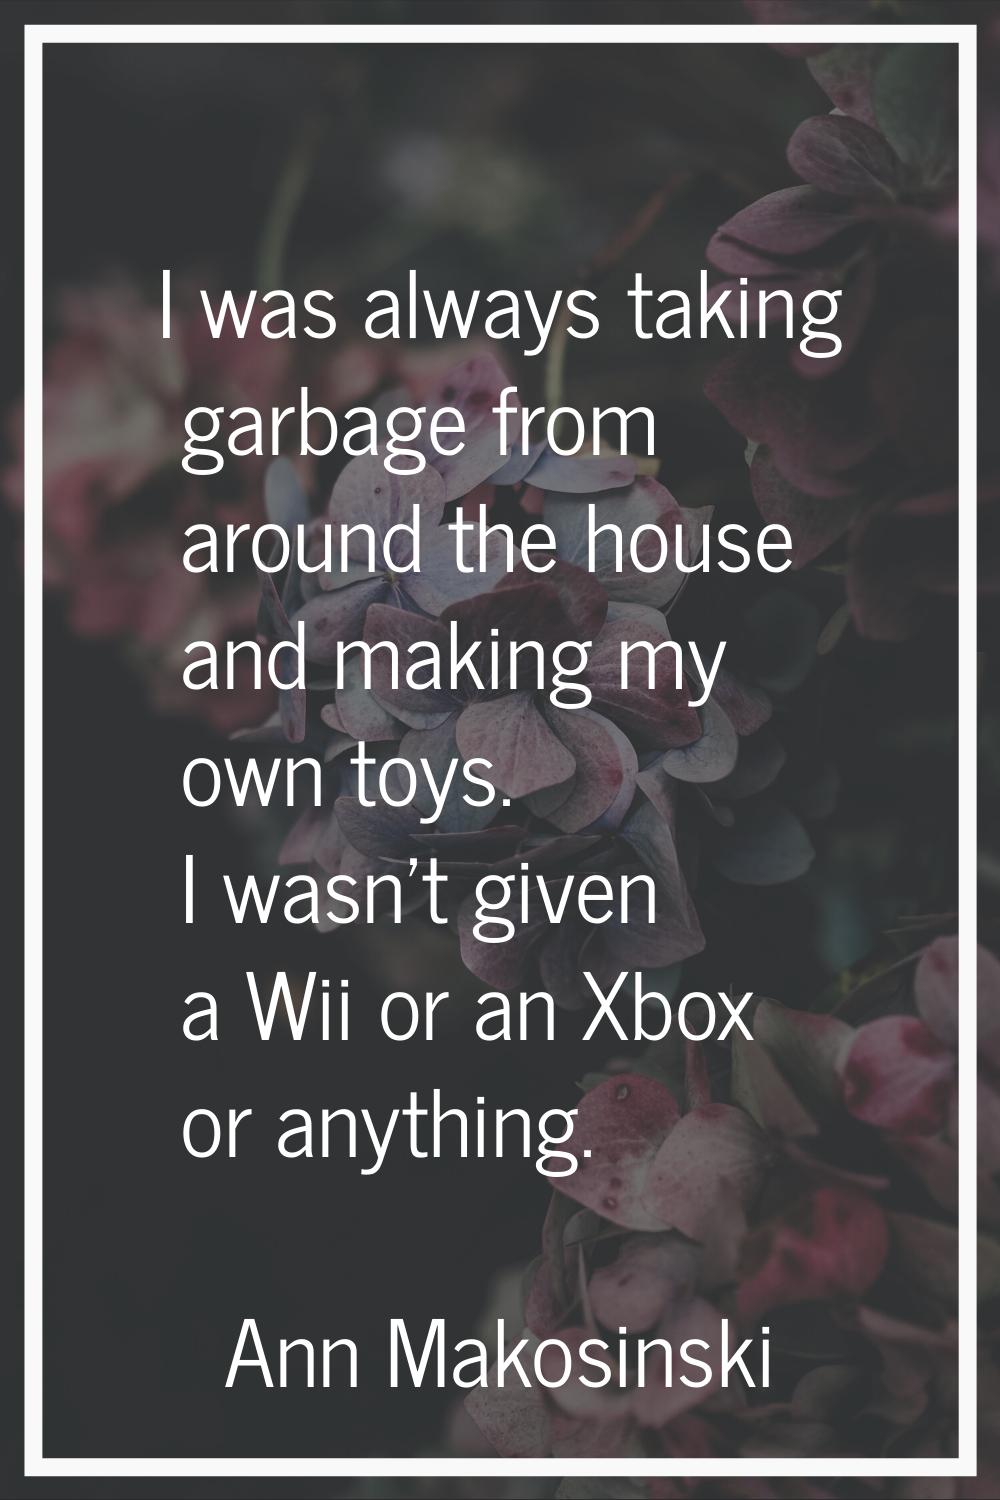 I was always taking garbage from around the house and making my own toys. I wasn't given a Wii or a